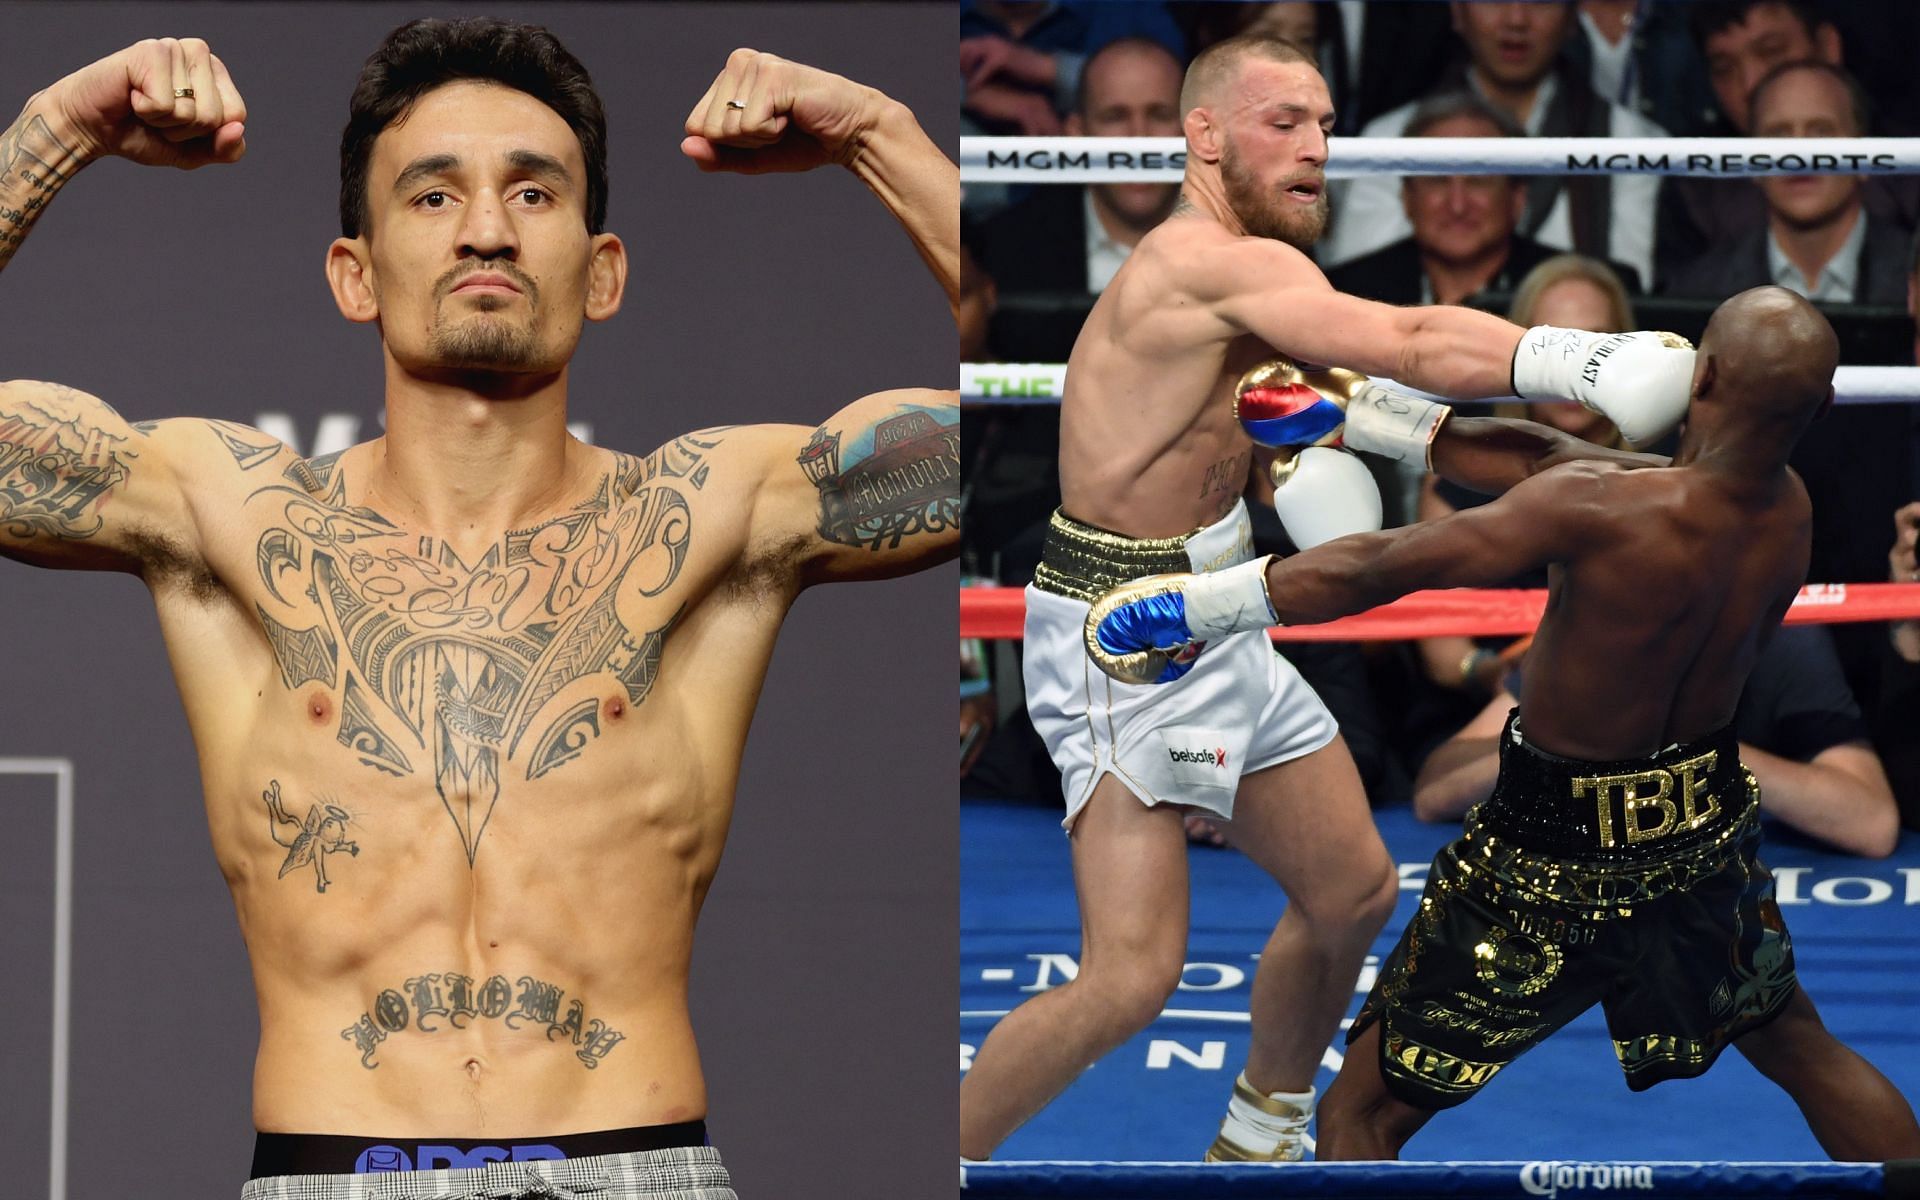 Max Holloway (left) and Conor McGregor vs. Floyd Mayweather (right) [Image credits: Getty Images]